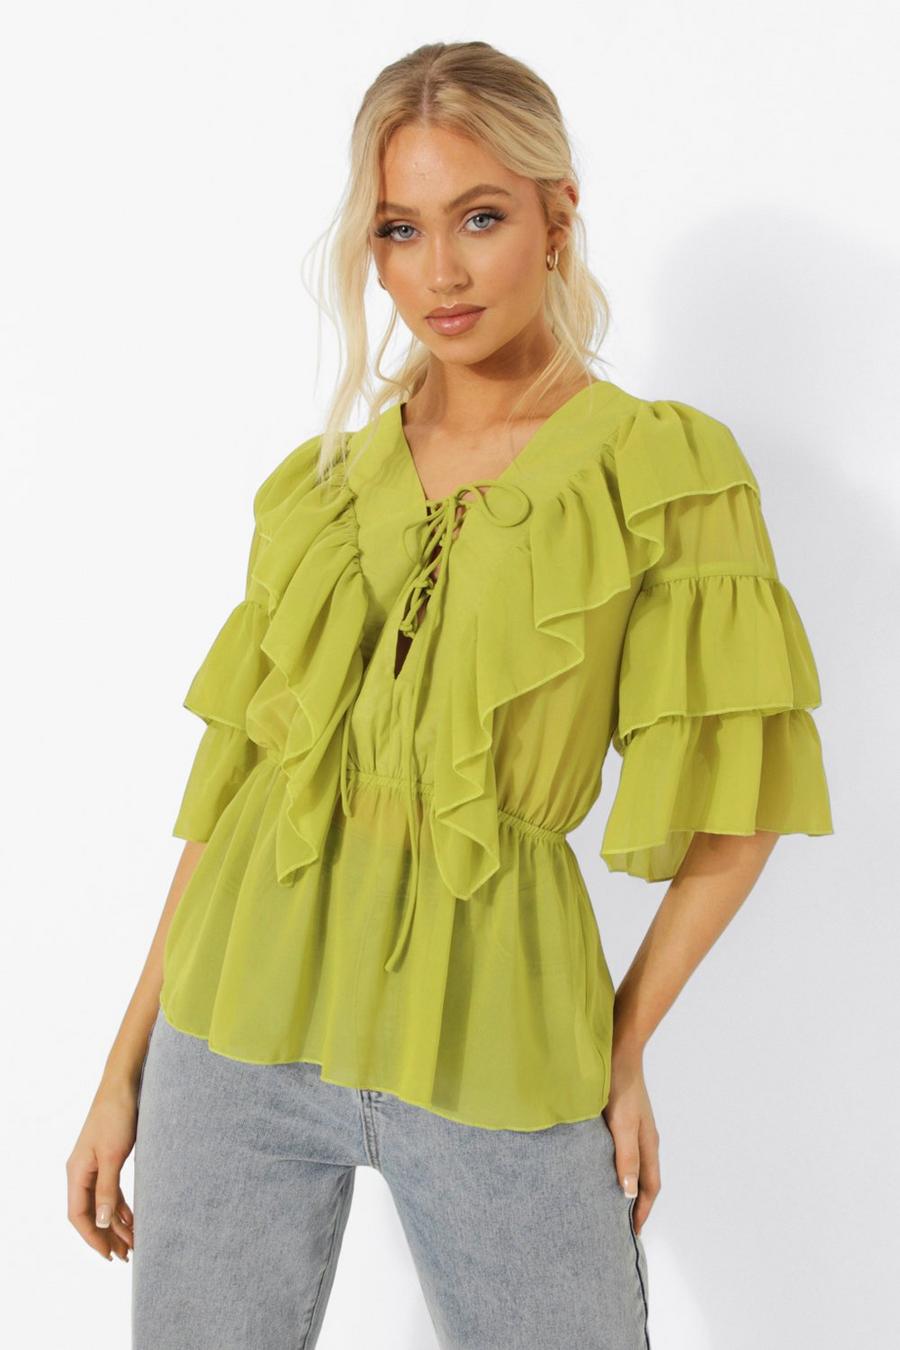 Chartreuse Woven Ruffle Lace Up Blouse